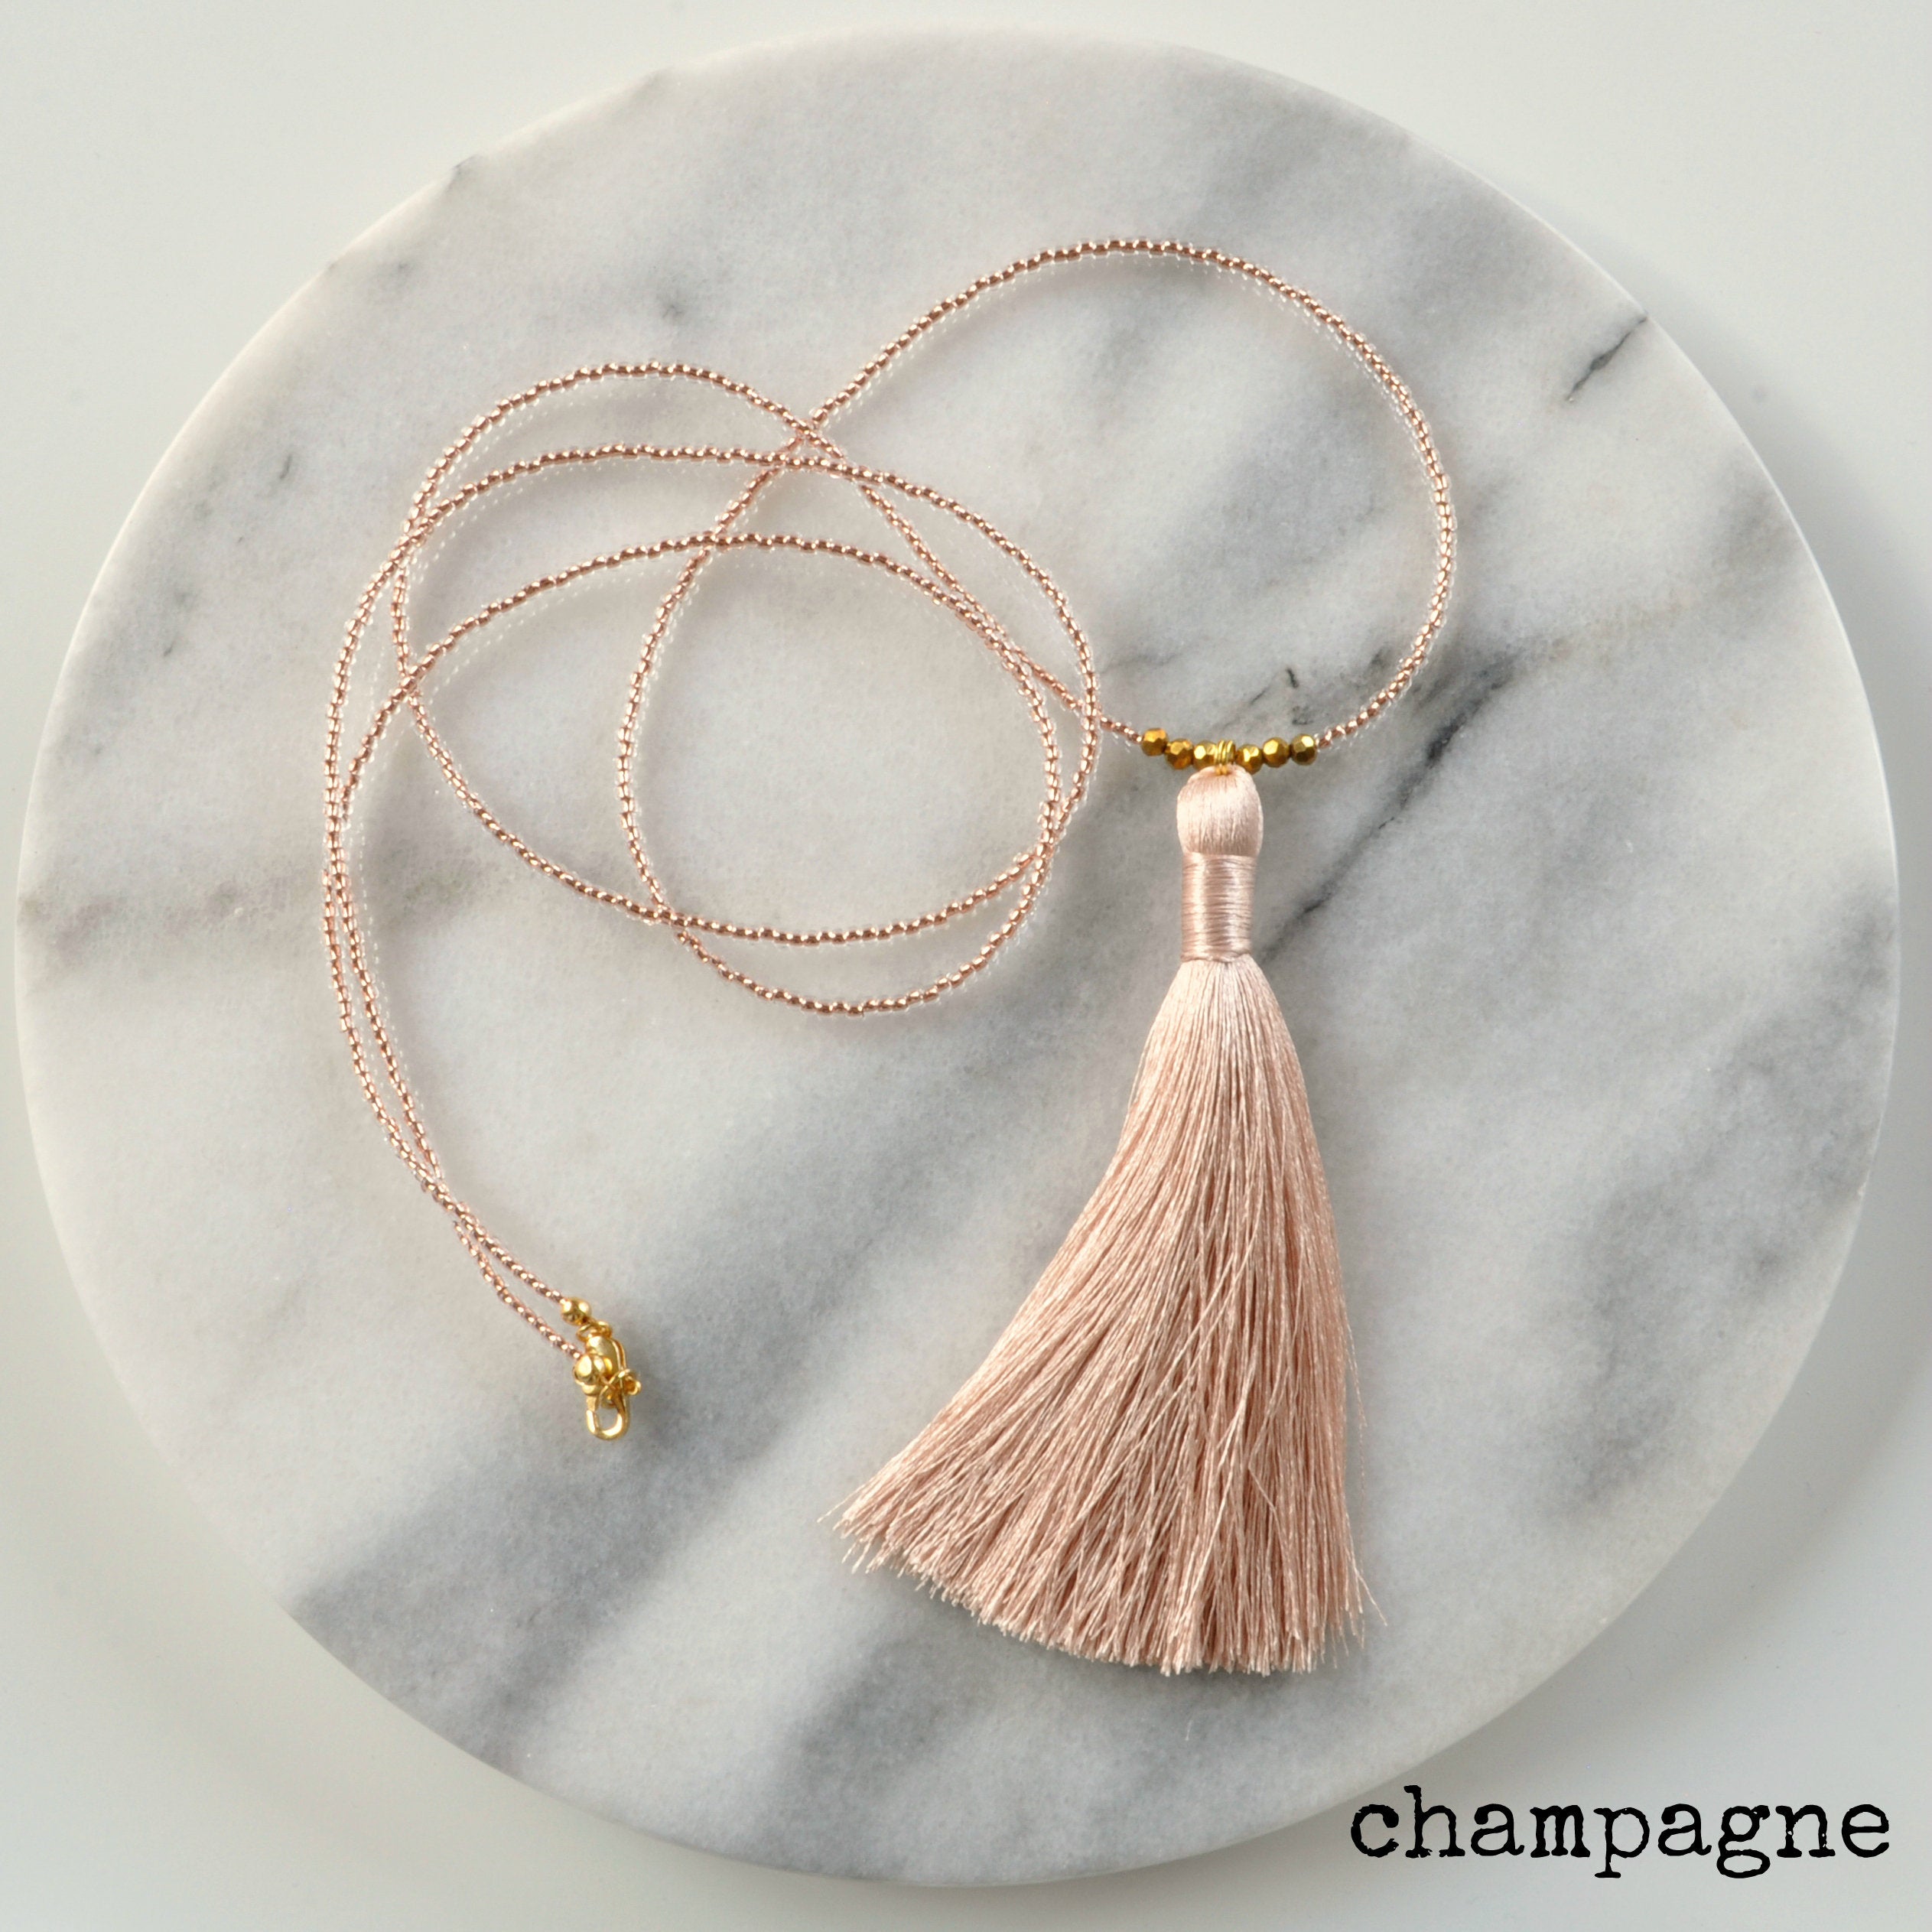 Libby & Smee Beaded Tassel Necklace in Champagne, still life labeled